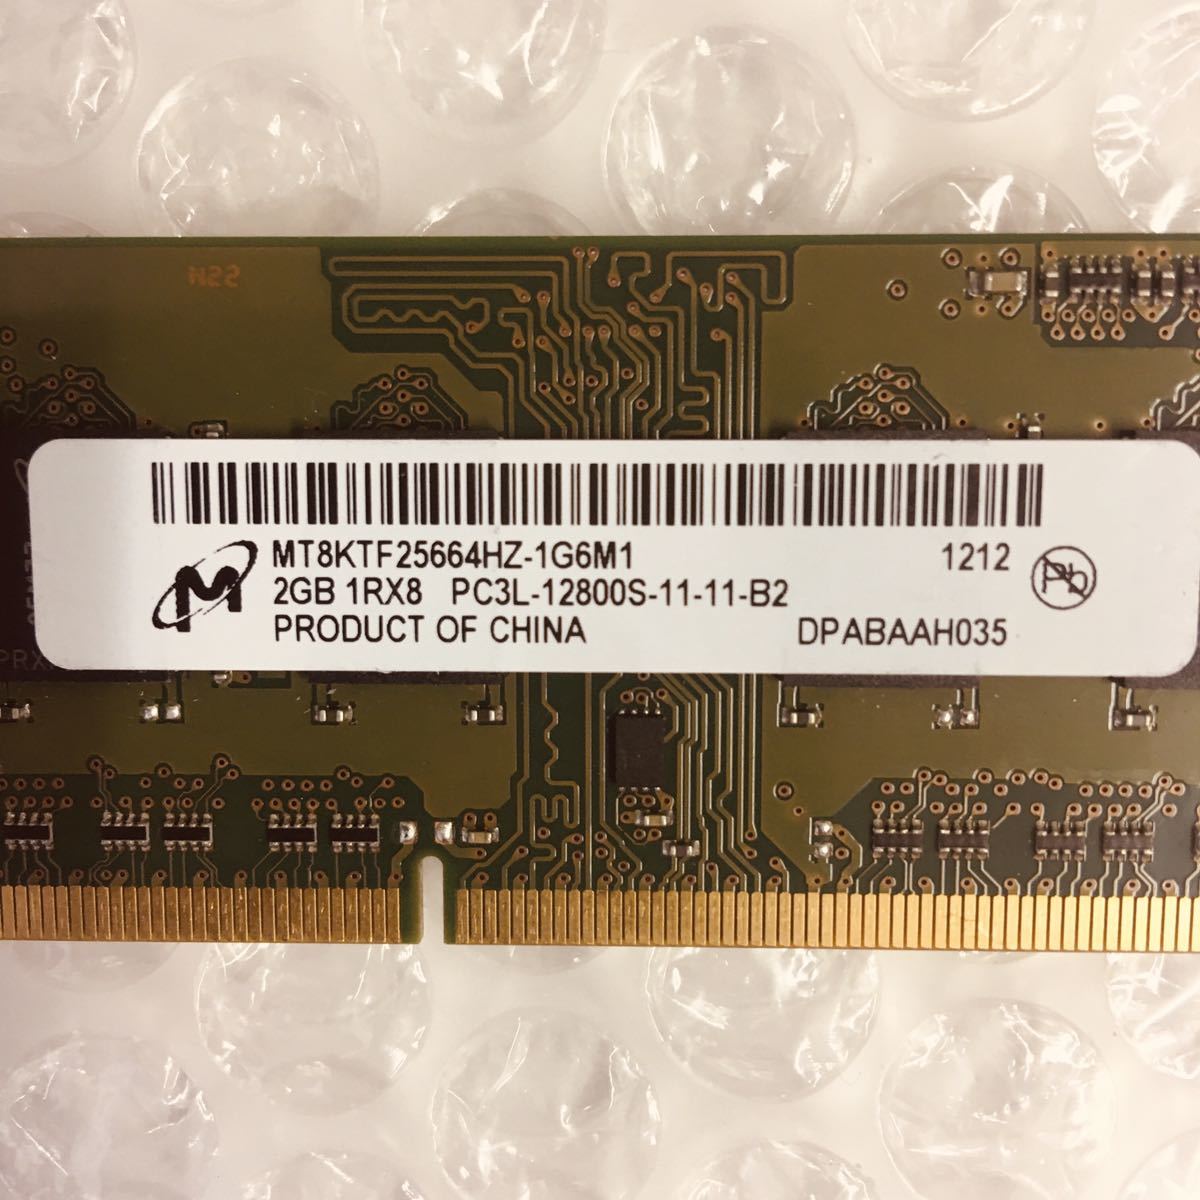  Gifu the same day postage 198 jpy * Note for DDR3 memory Micron 2GB (2GB×1 sheets )1Rx8 PC3L-12800S-11-11-B2 * operation verification settled RD017